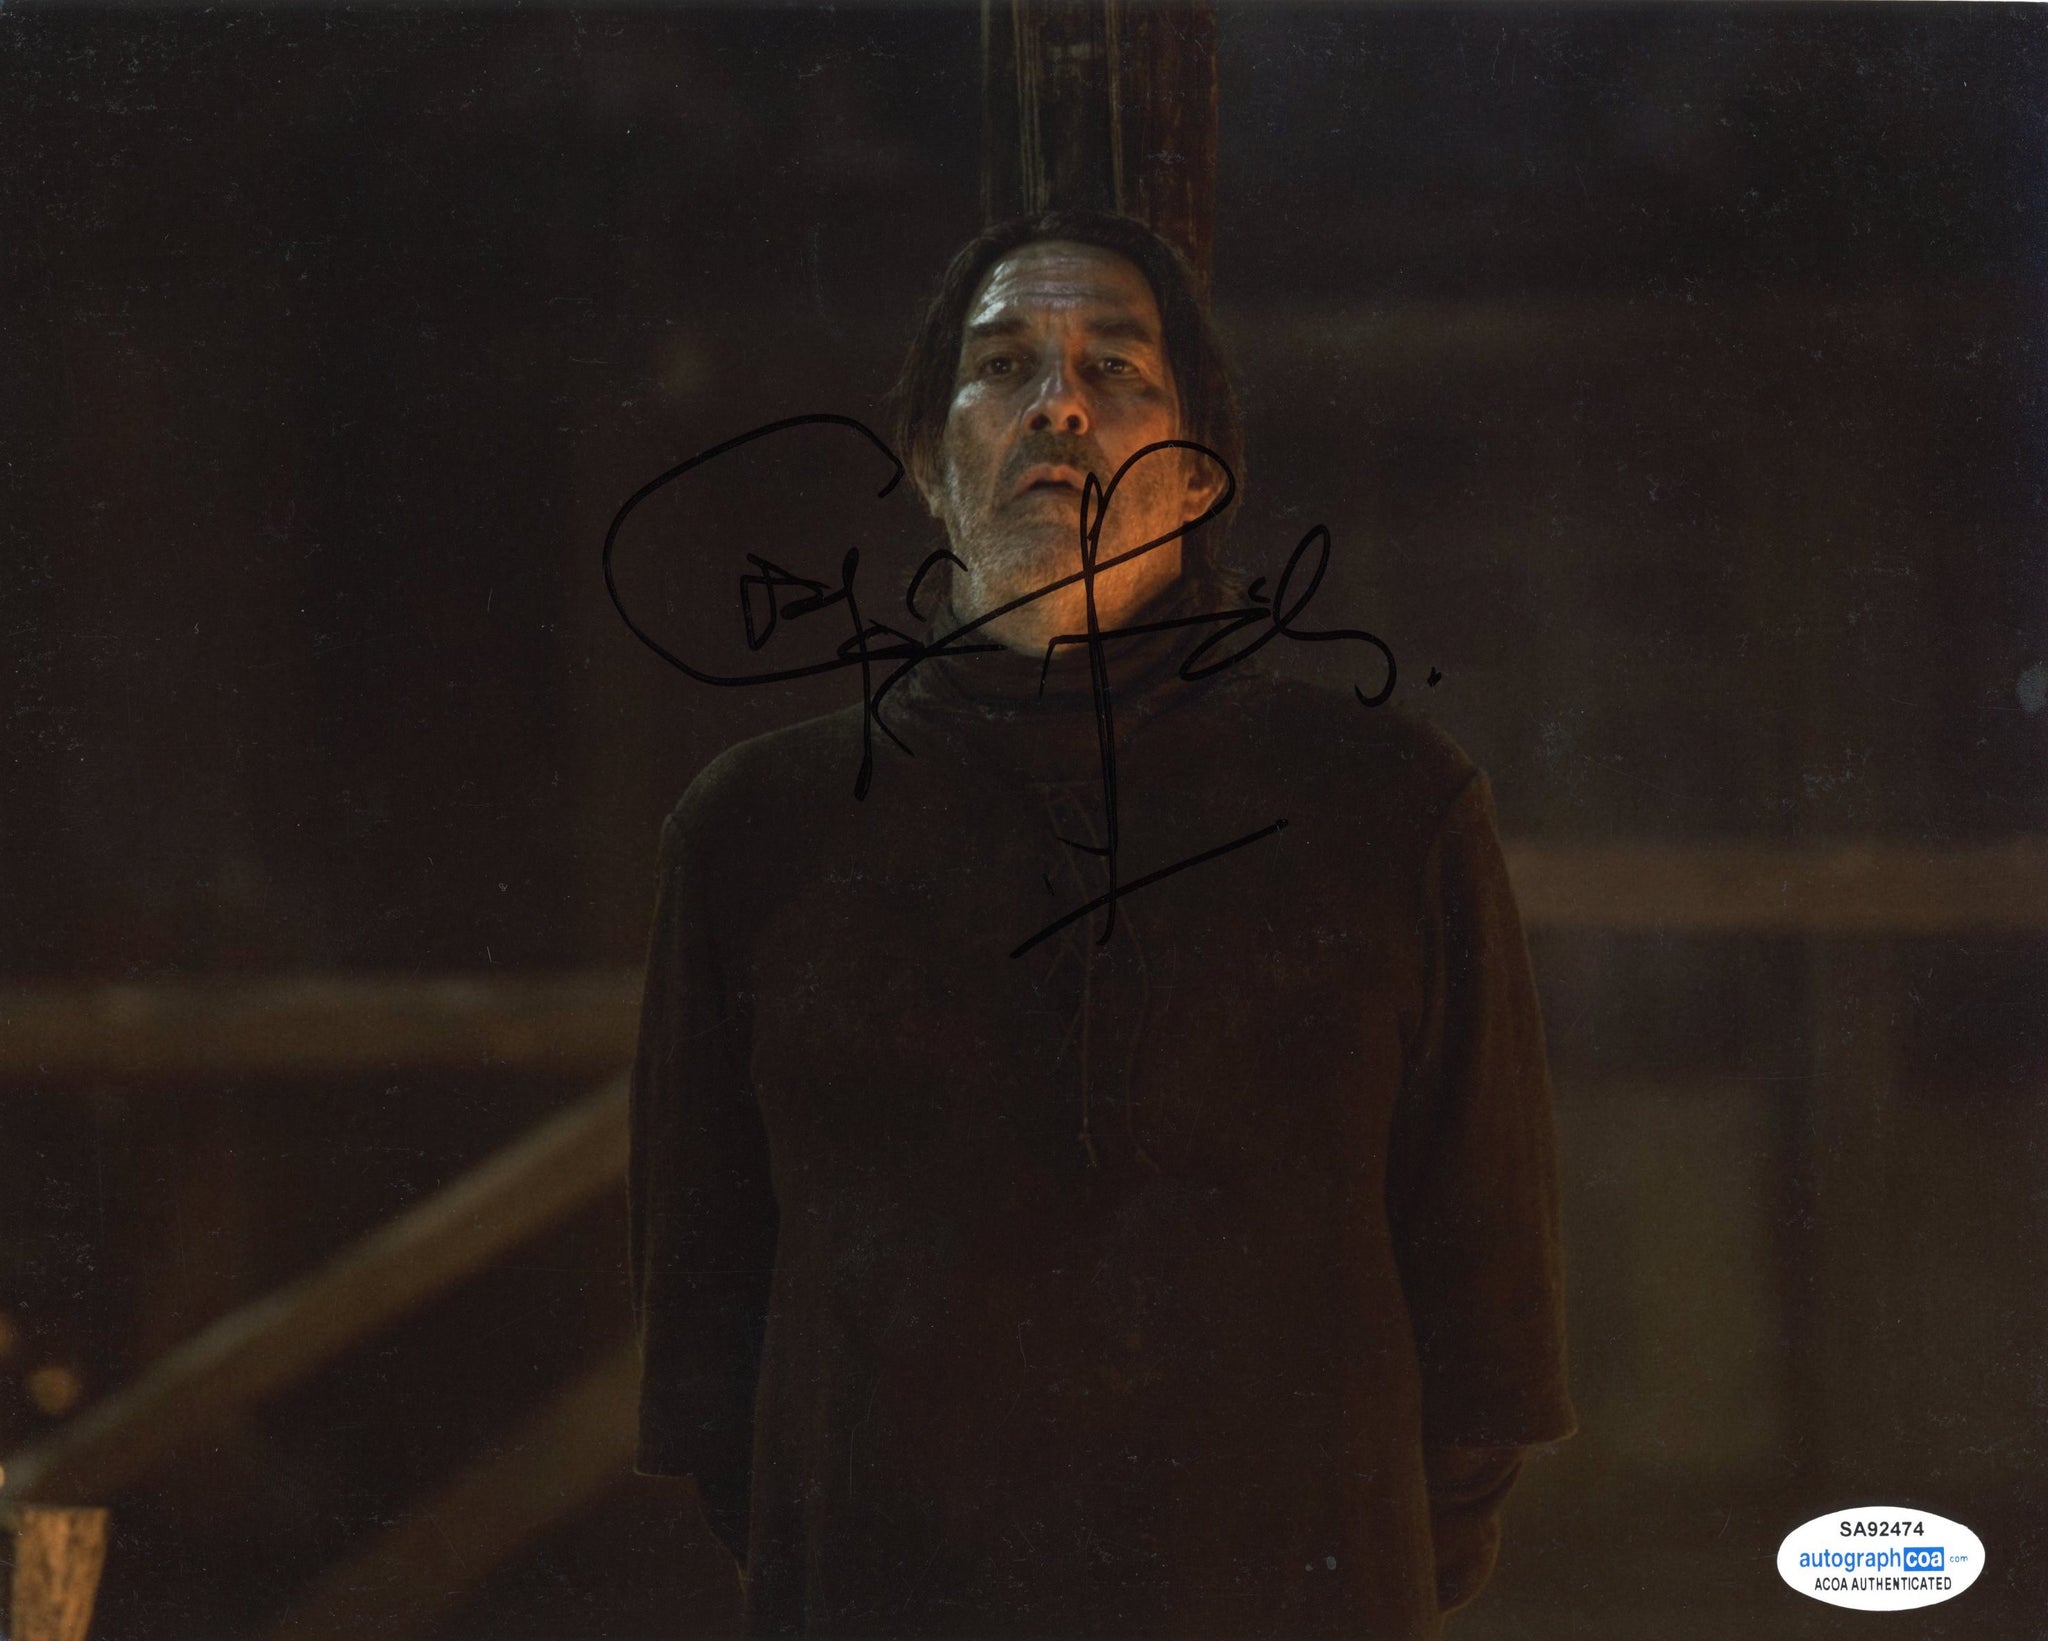 Ciaran Hinds Game of Thrones Signed Autograph 8x10 Photo ACOA